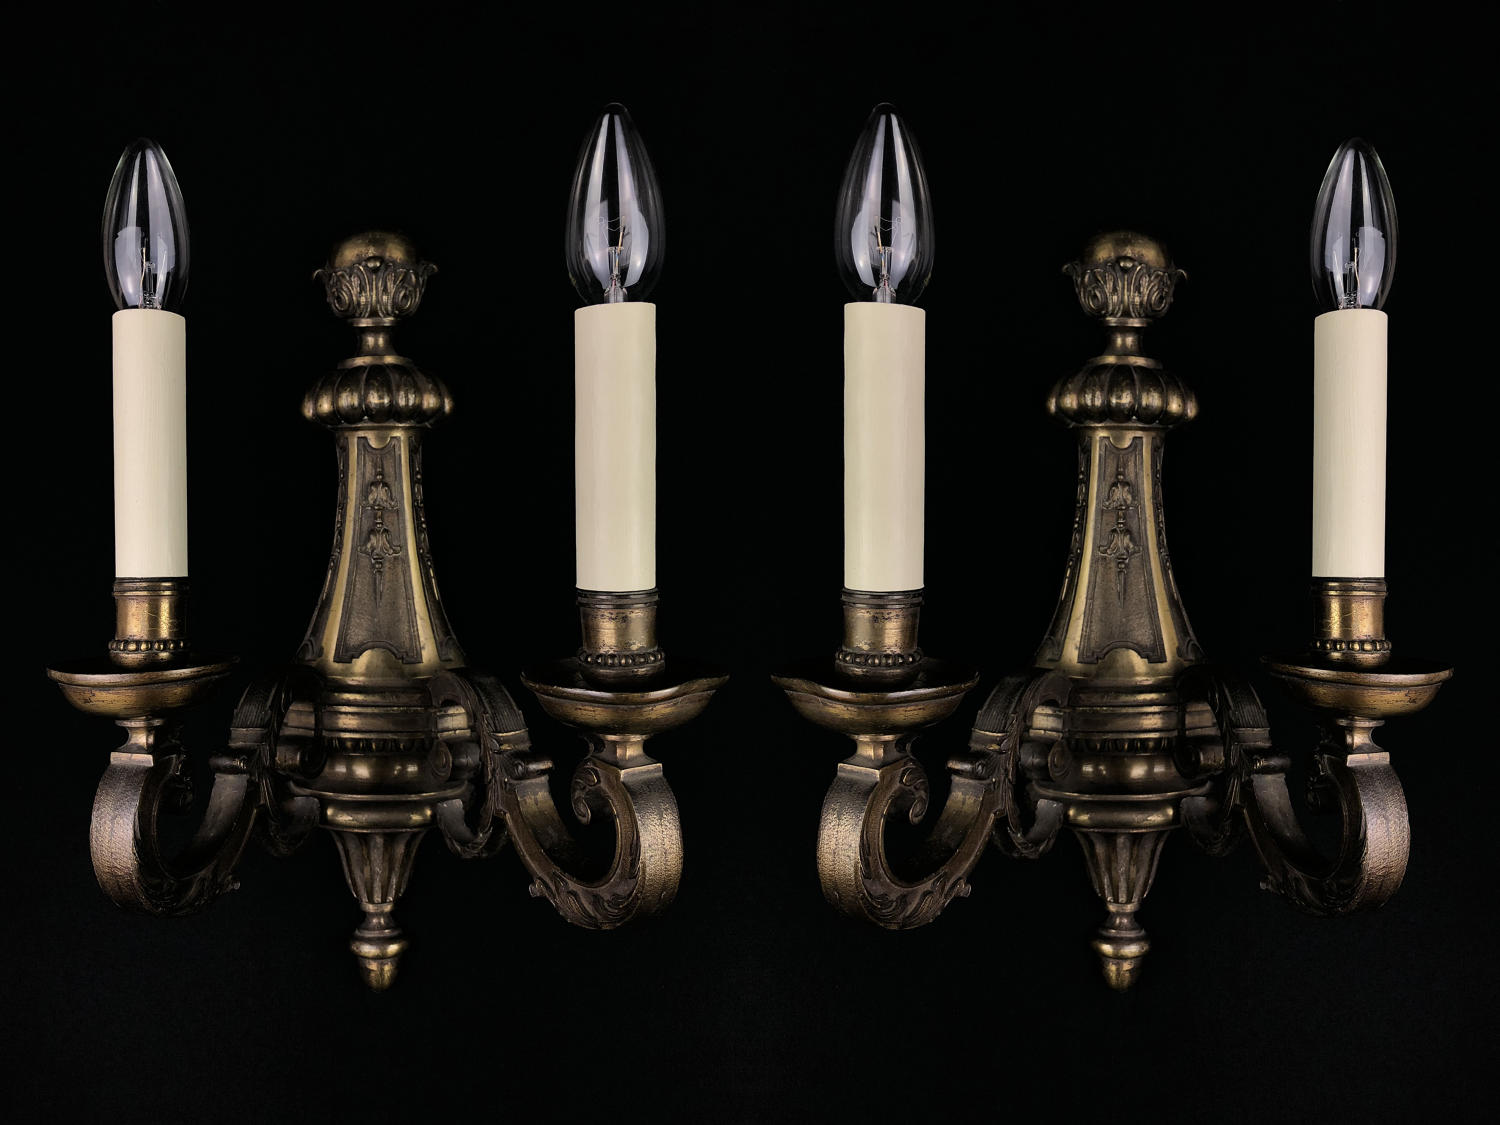 A set of four large Regency style wall lights